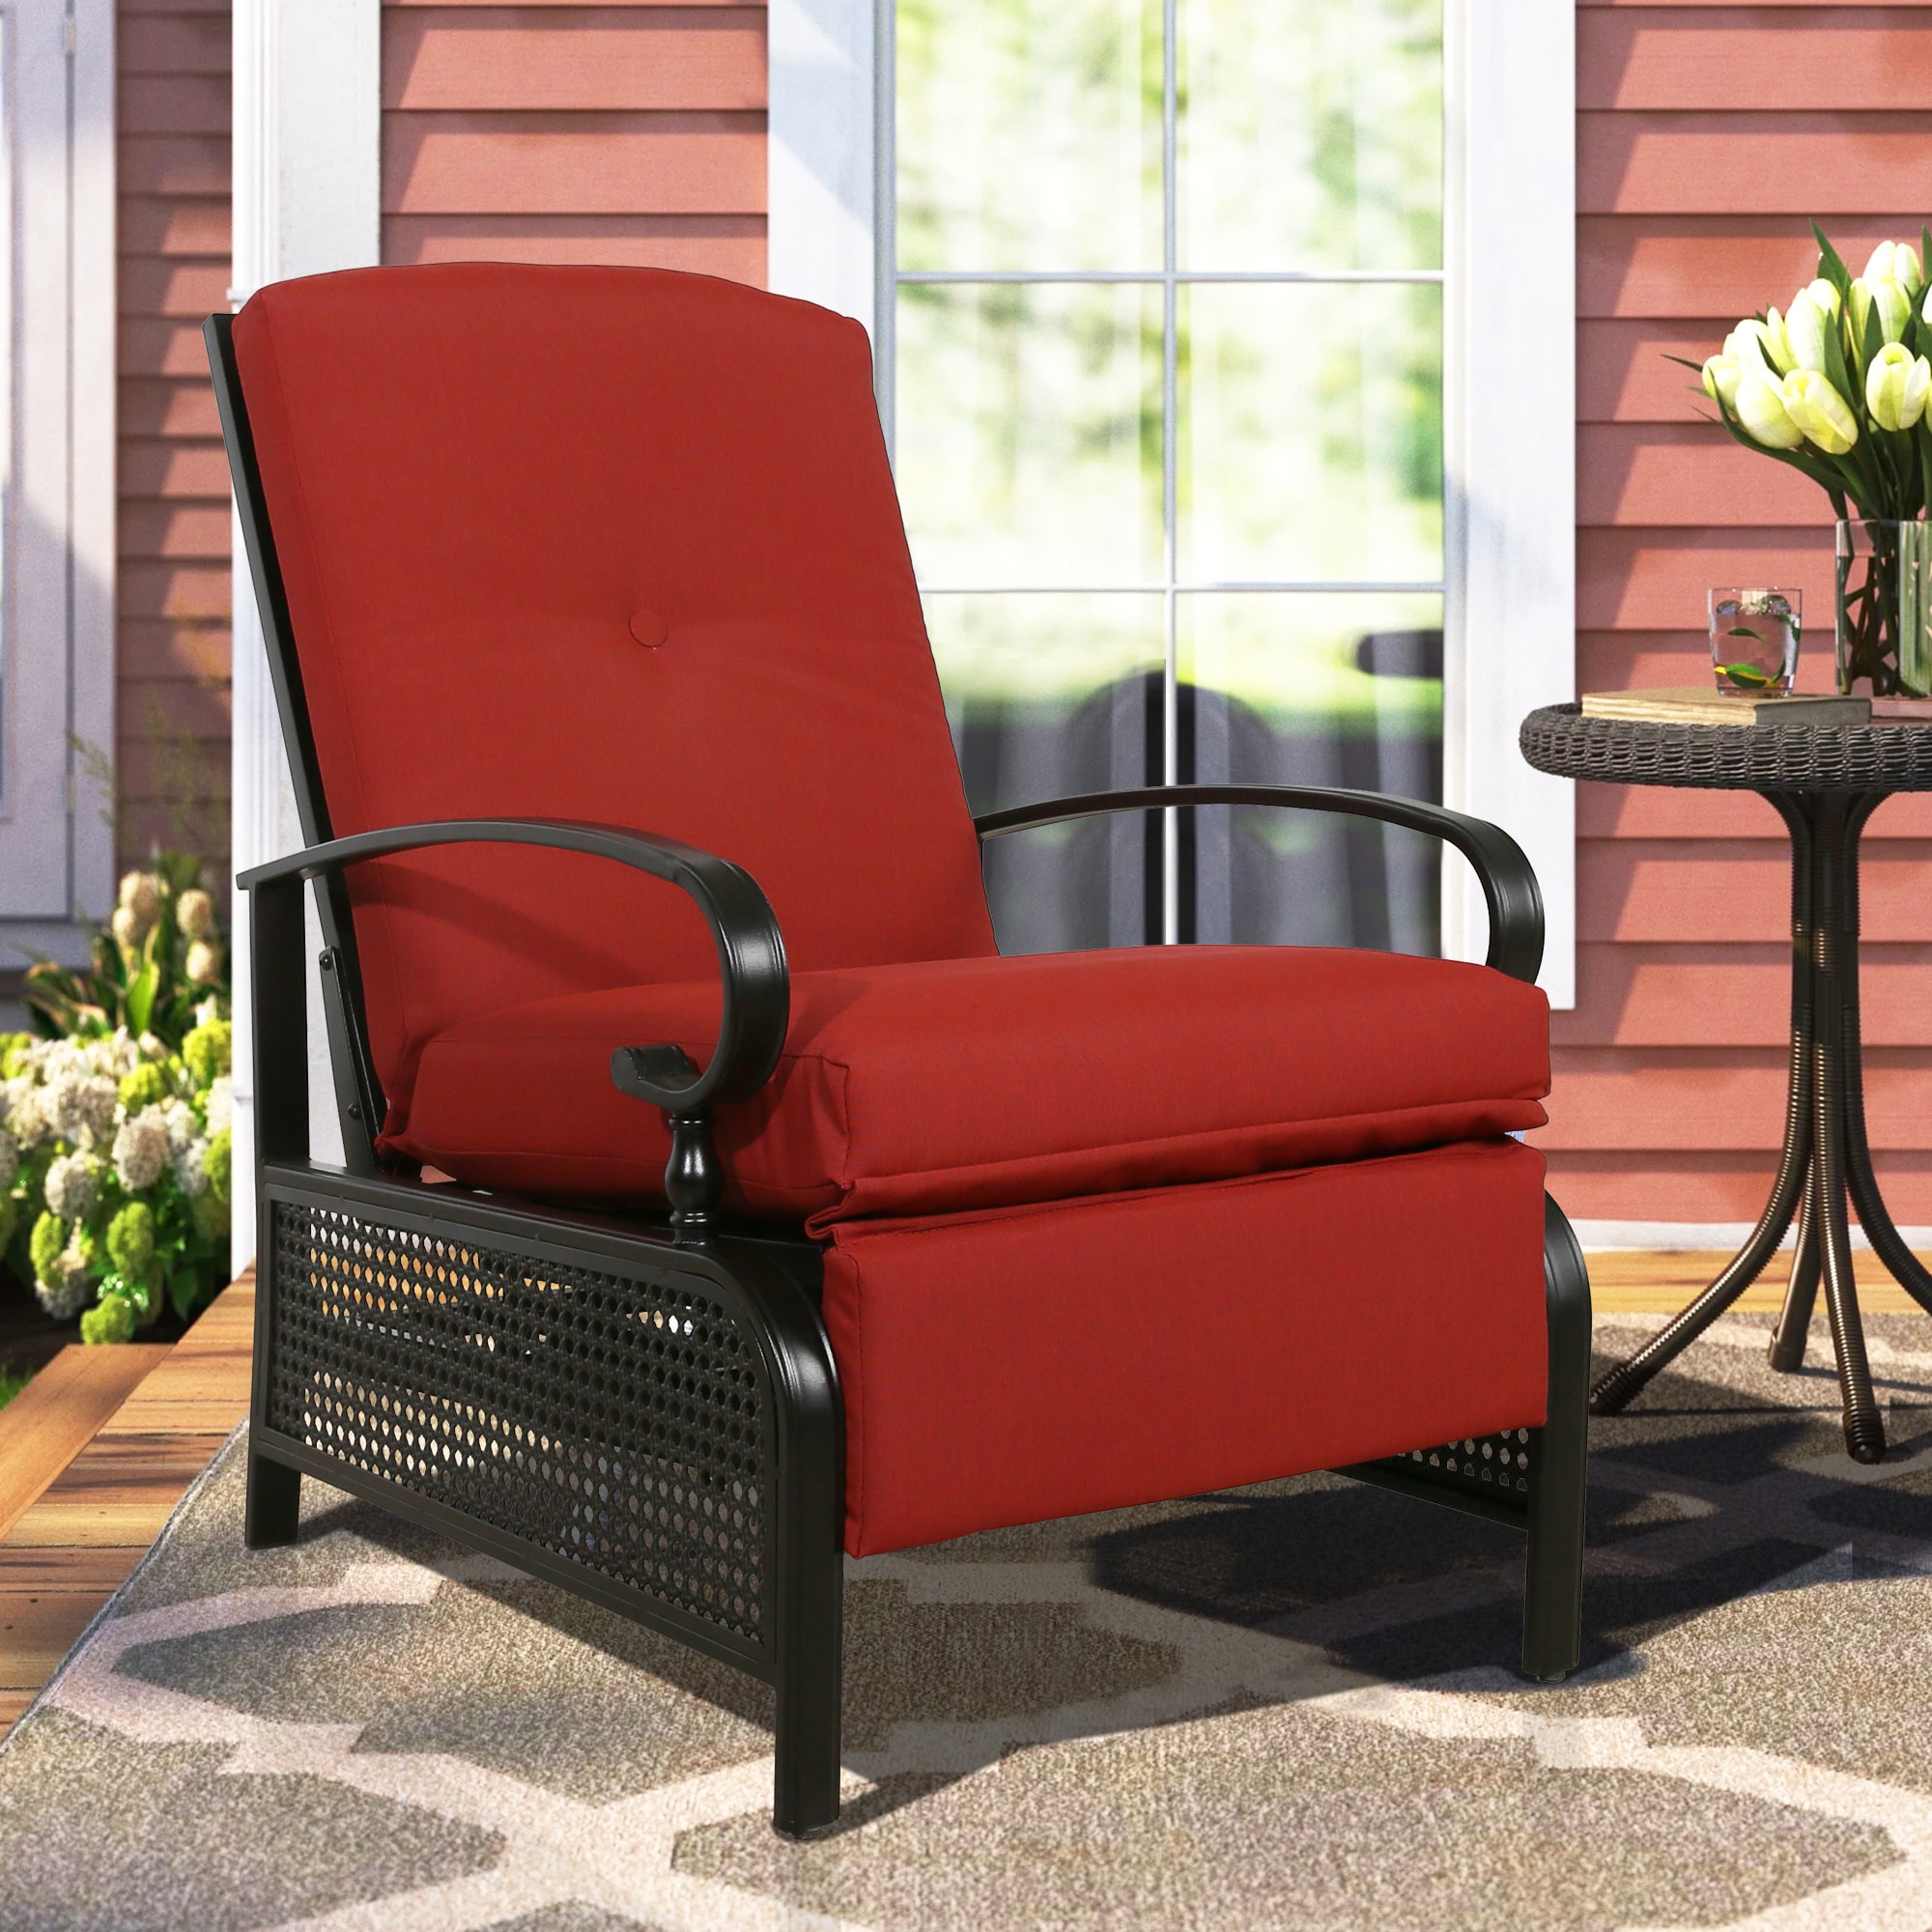 Recliner Chair Wicker Black Metal Frame Stationary Recliner Chair(s) with Red Olefin Cushioned Seat | - PEAK HOME FURNISHINGS 970147R